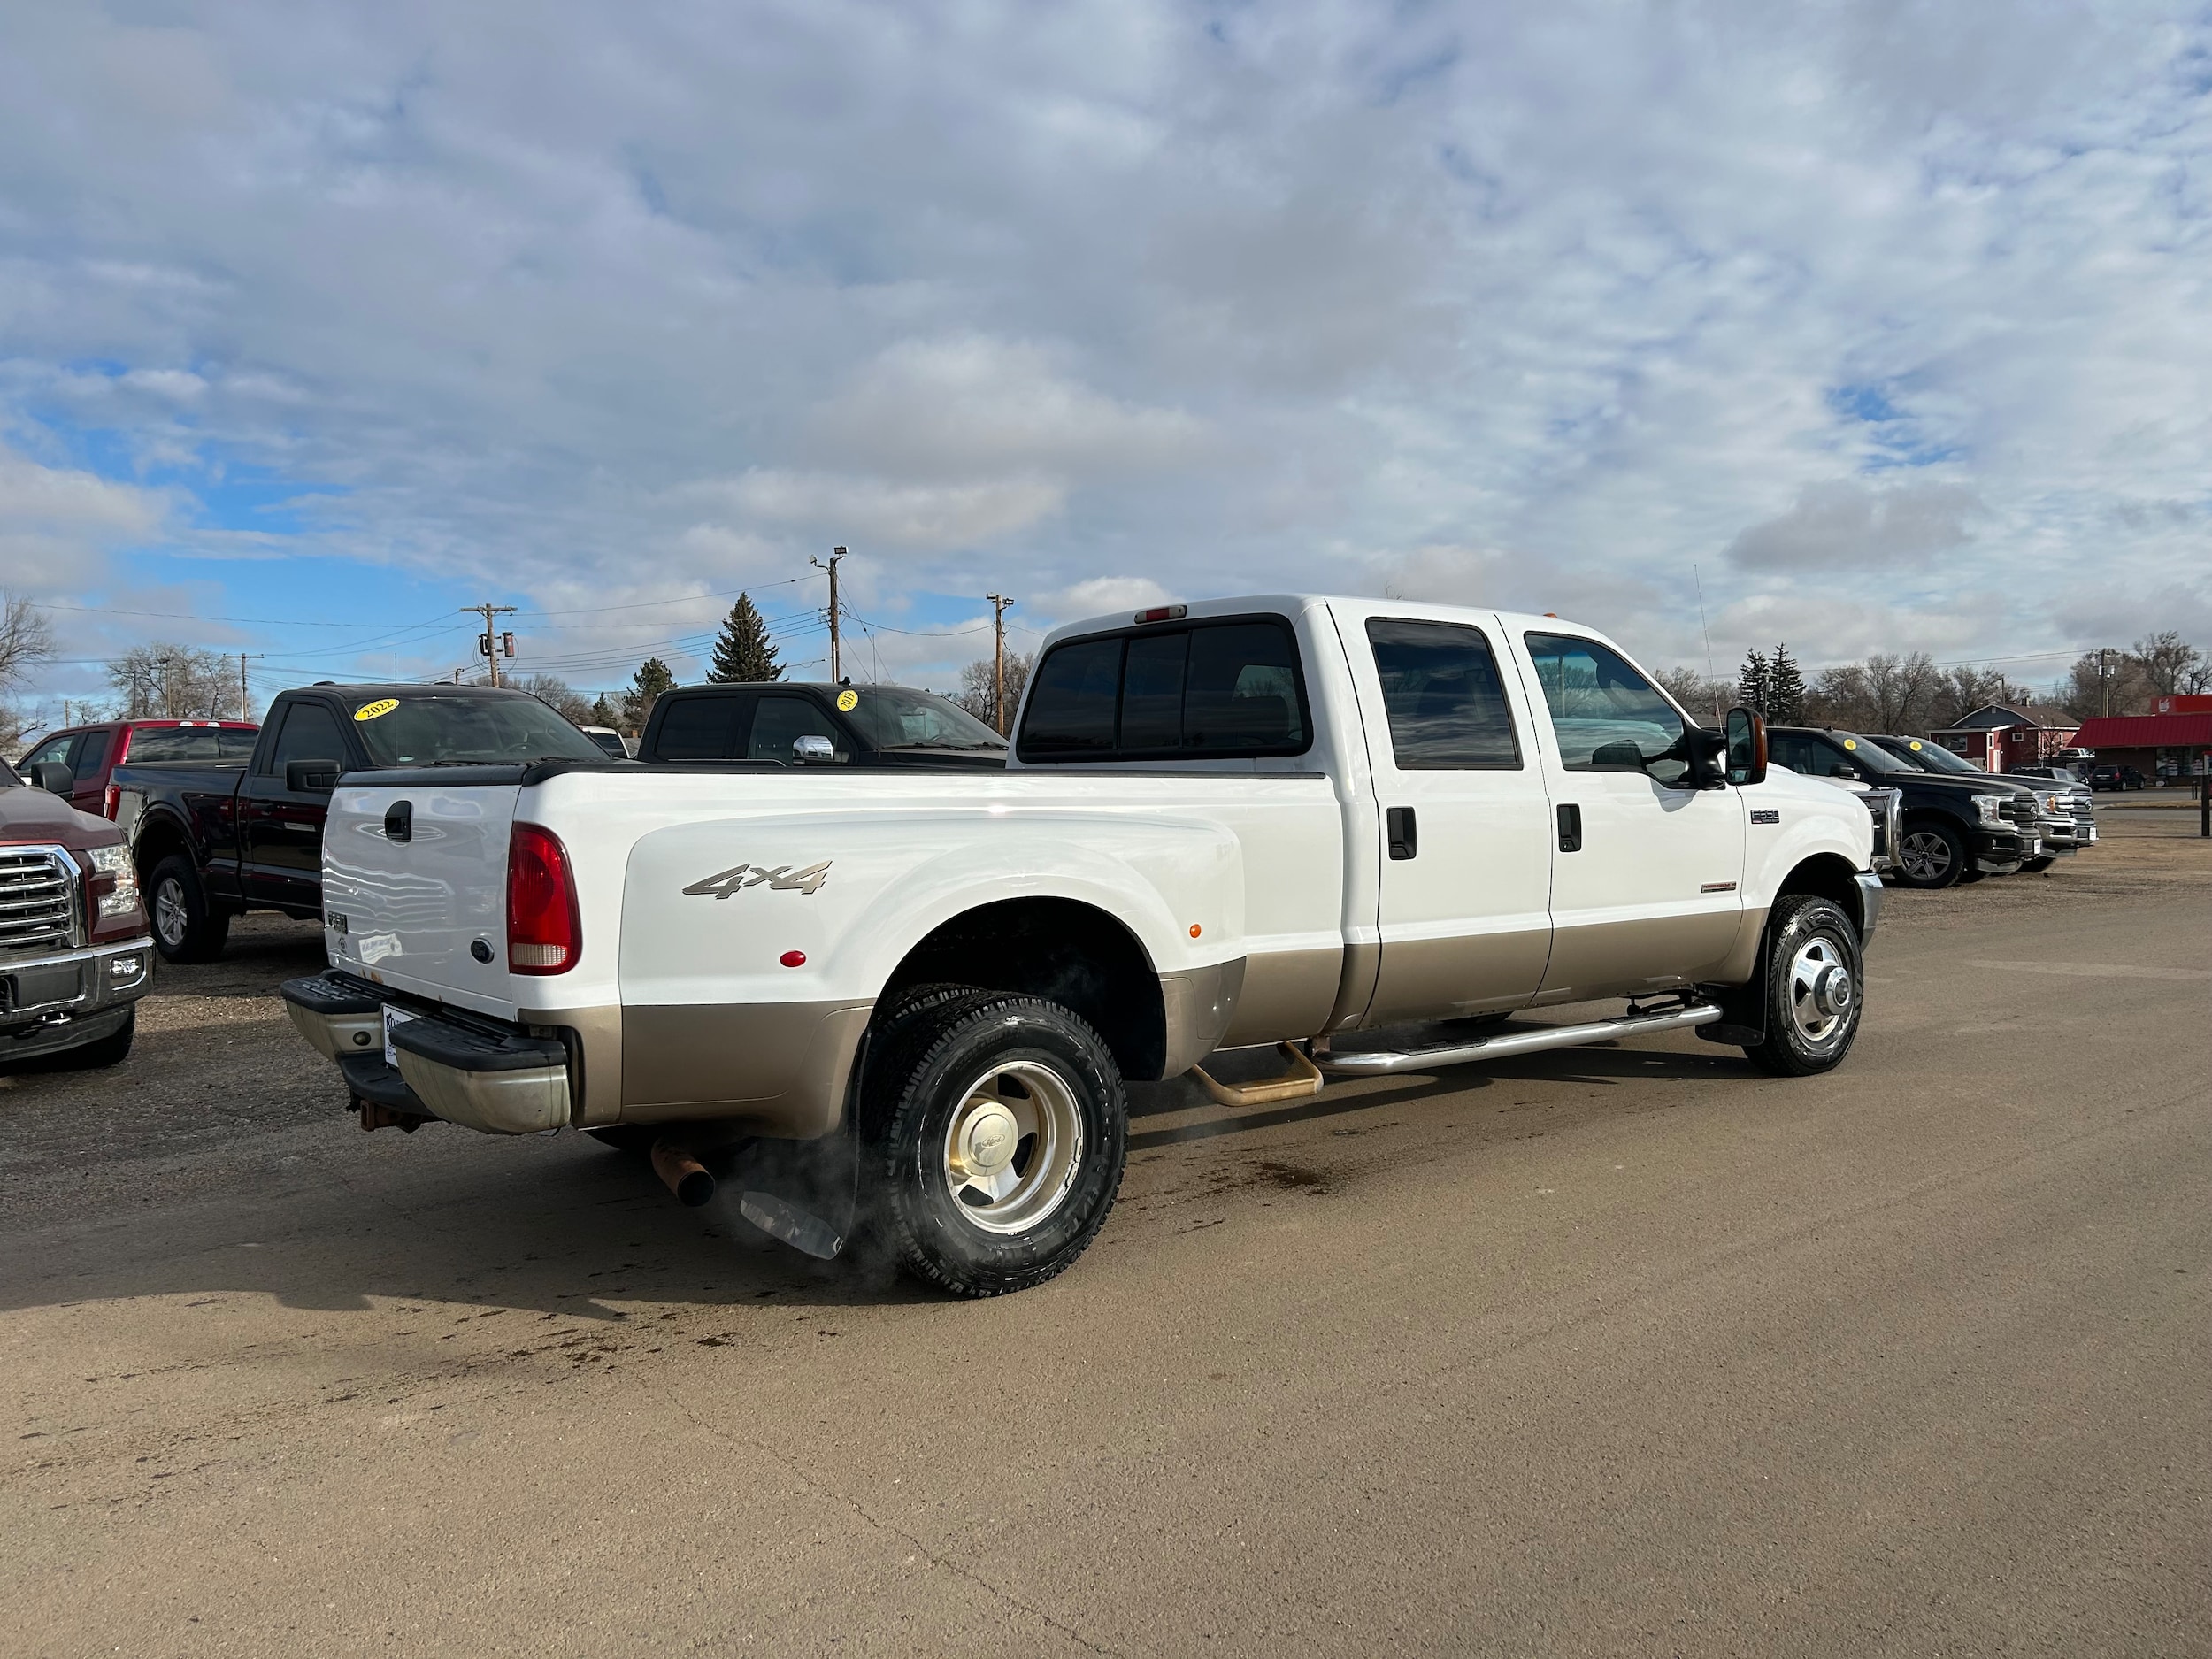 Used 2004 Ford F-350 Super Duty Lariat with VIN 1FTWW33P24ED88179 for sale in Bowman, ND